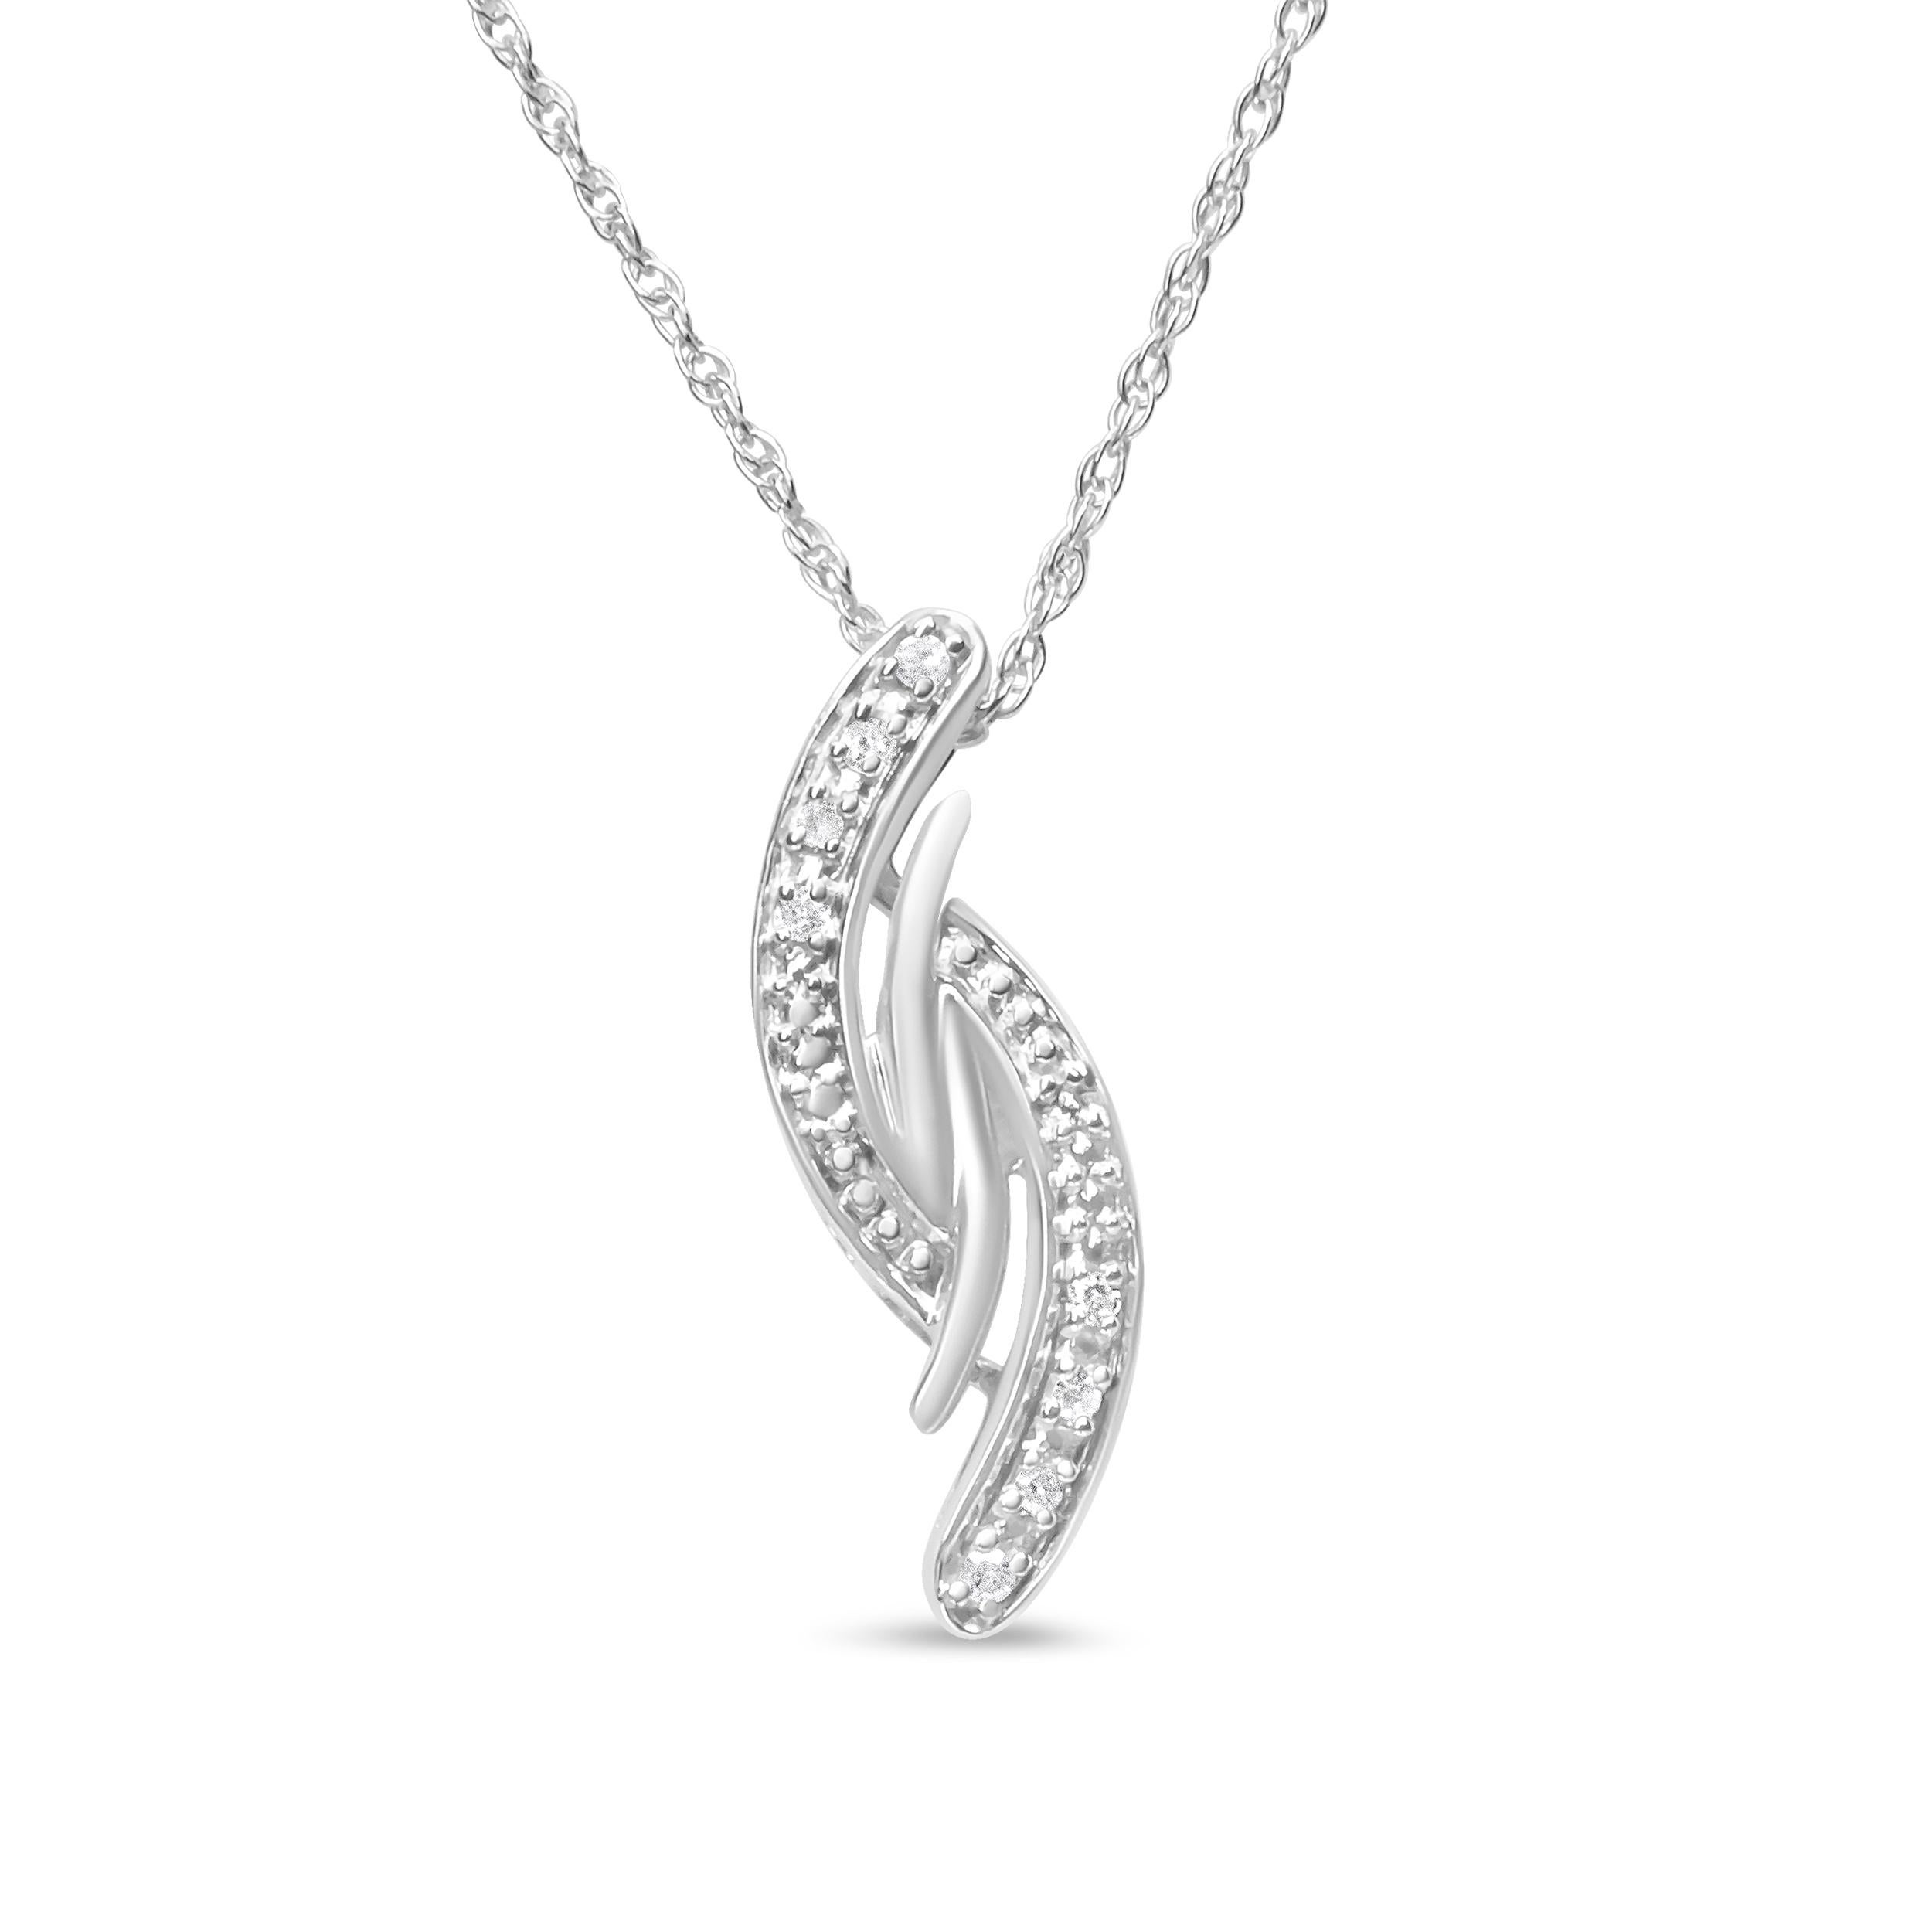 Simple in design and classy by look, this diamond pendant is composed of alluring sterling silver. The intriguing neckpiece is embellished with shimmering round cut diamonds. Polished high to shine with grace, the pendant will look even more